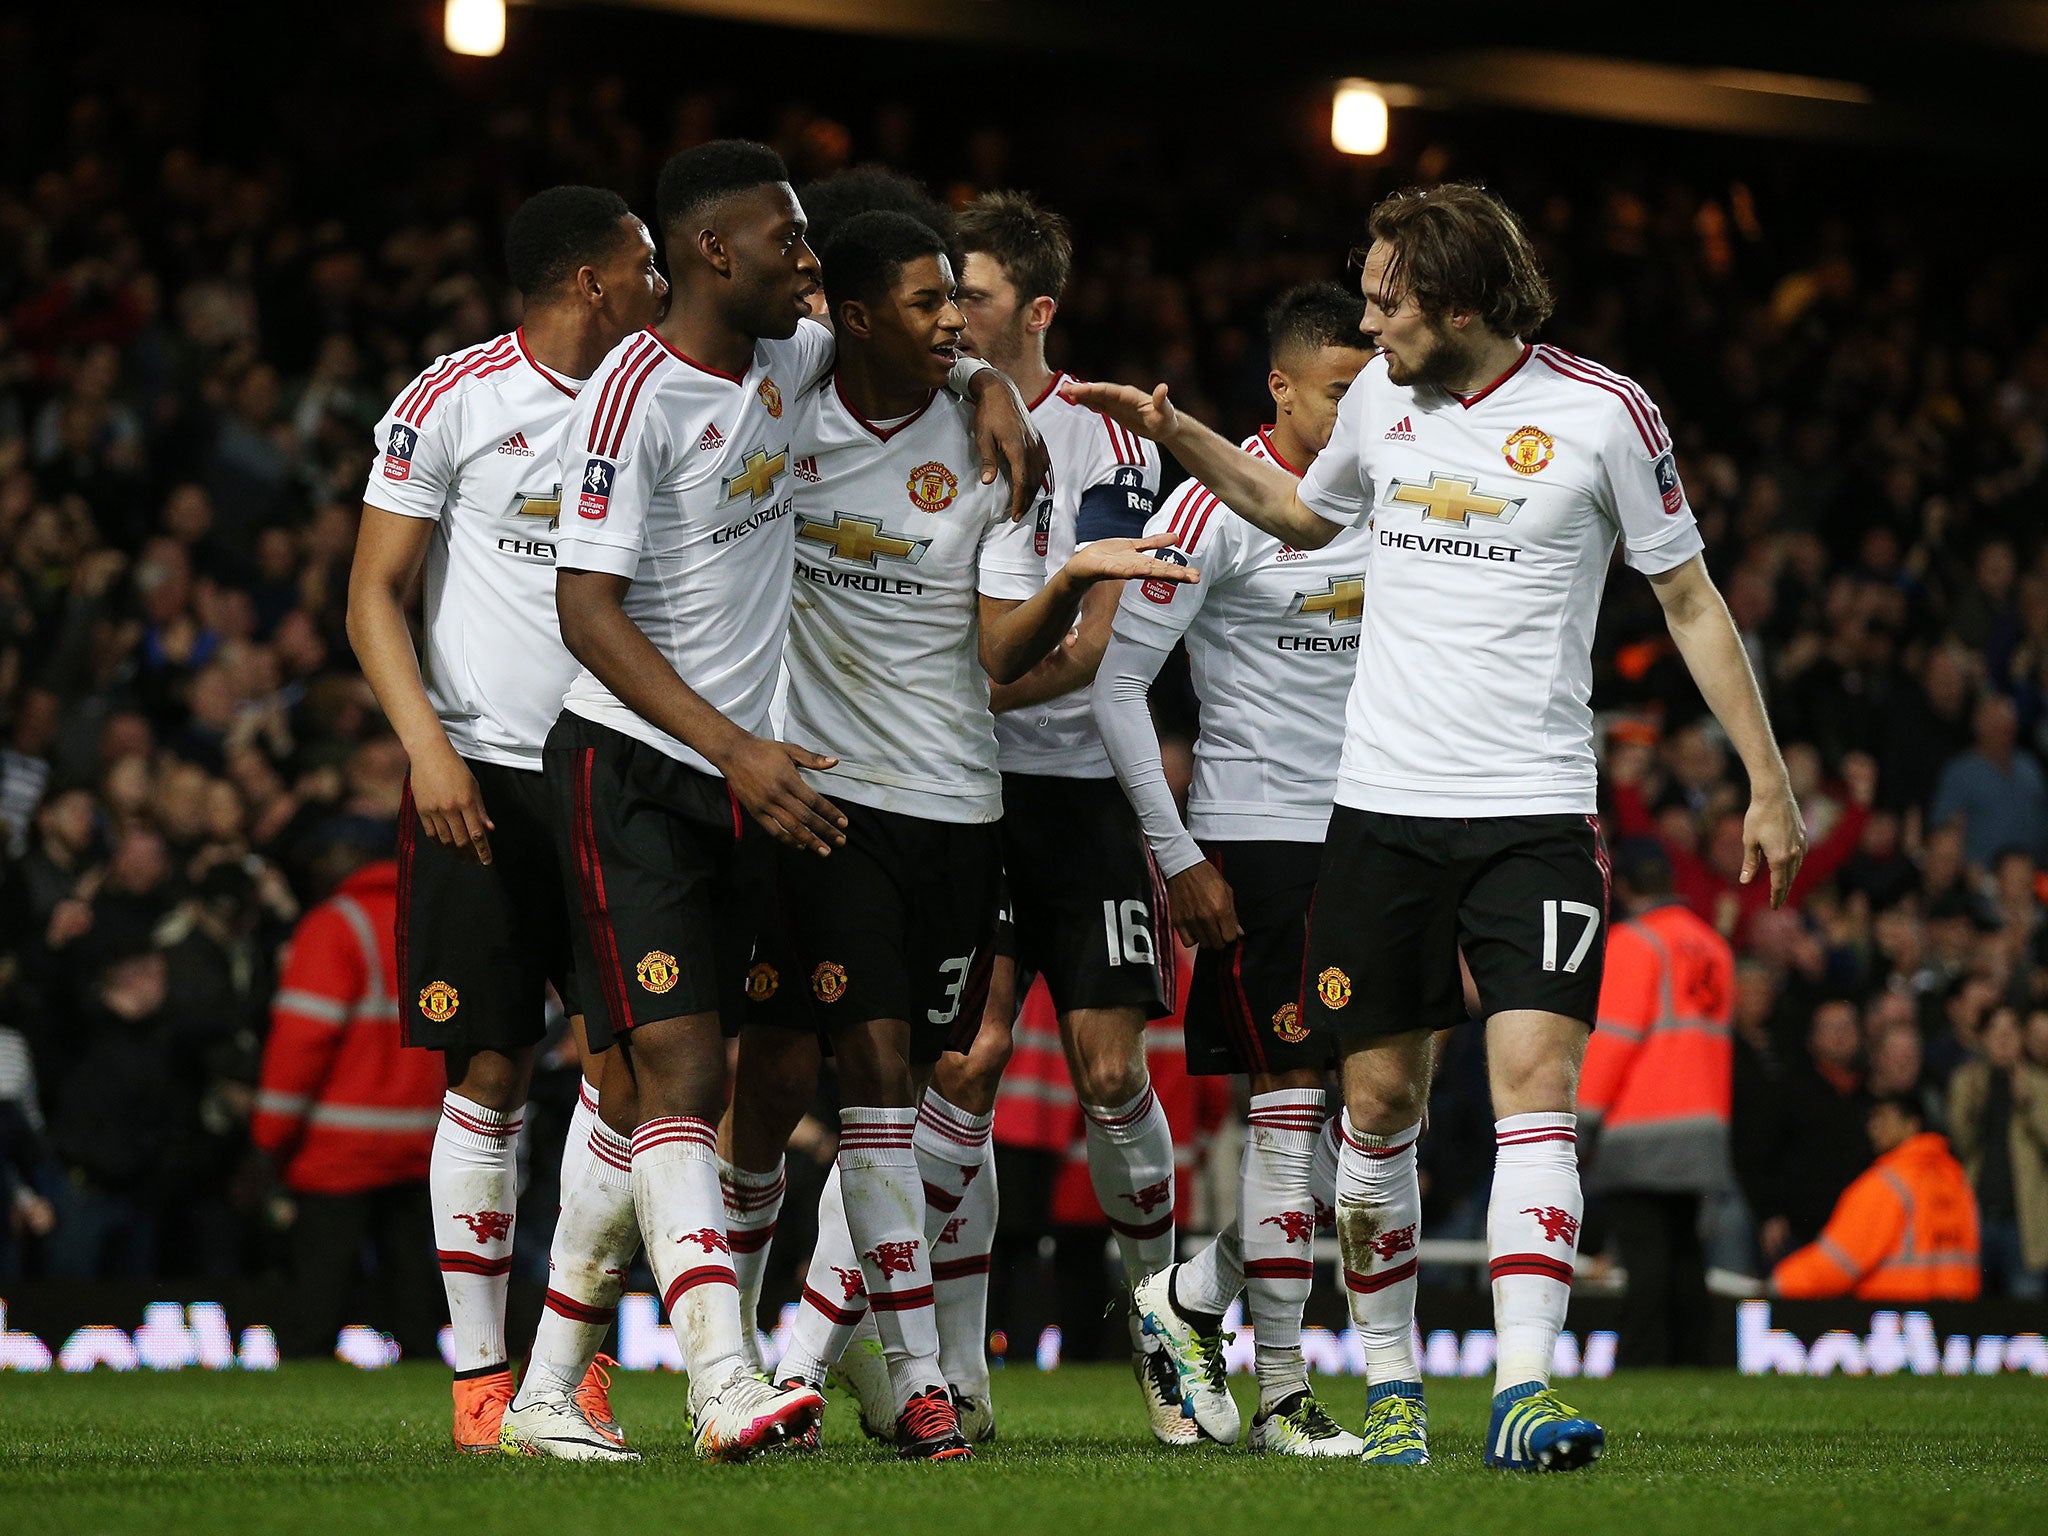 Marcus Rashford is mobbed by his team-mates after his goal